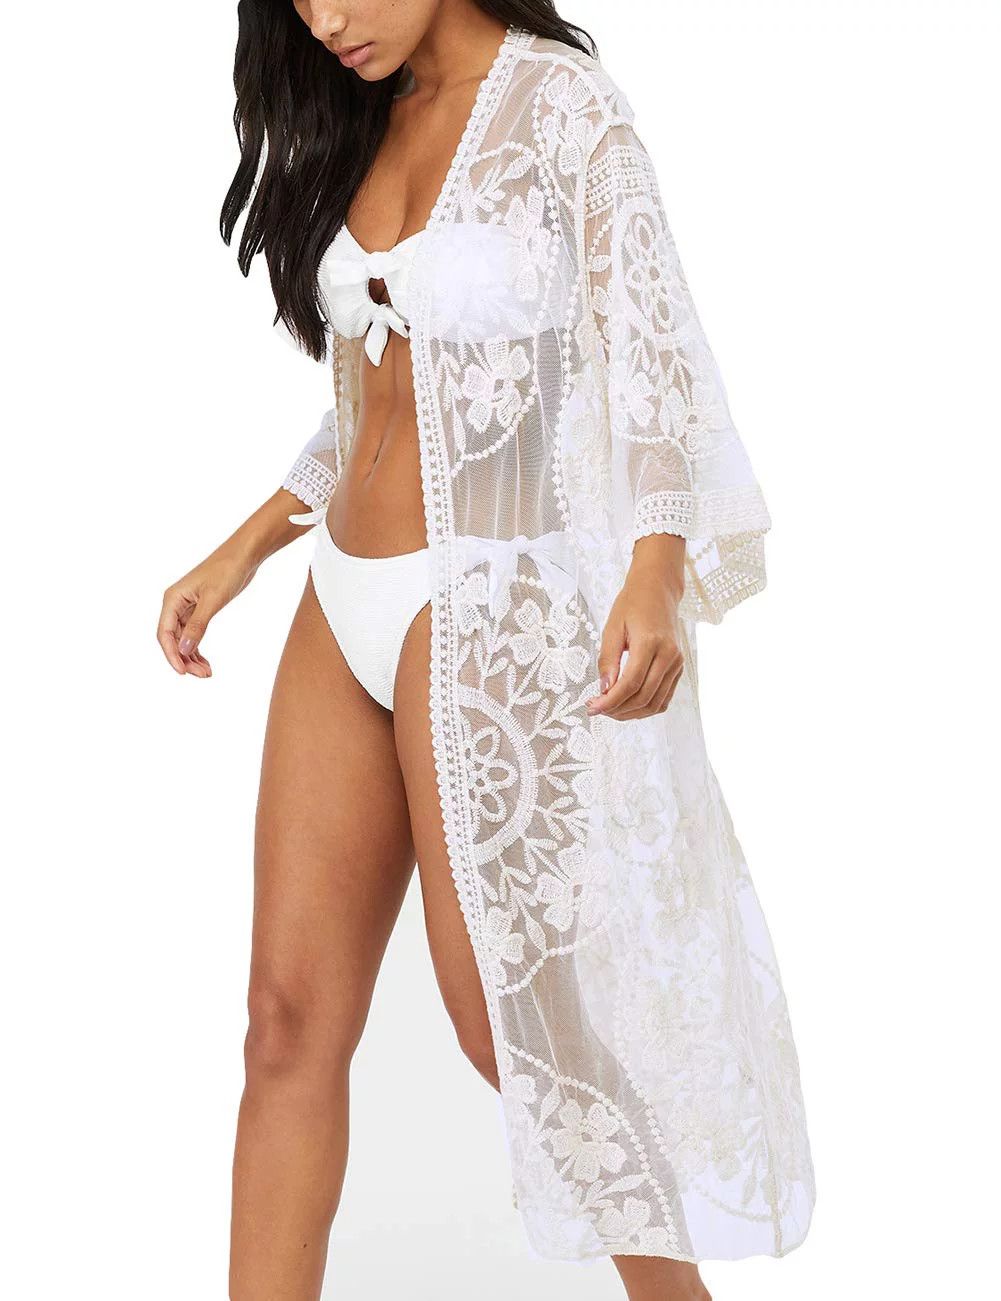 Bsubseach Women White Sexy Lace Long Sleeve Swimsuit Embroidery Beach Kimono Cover Up, Beach Outfits | Walmart (US)